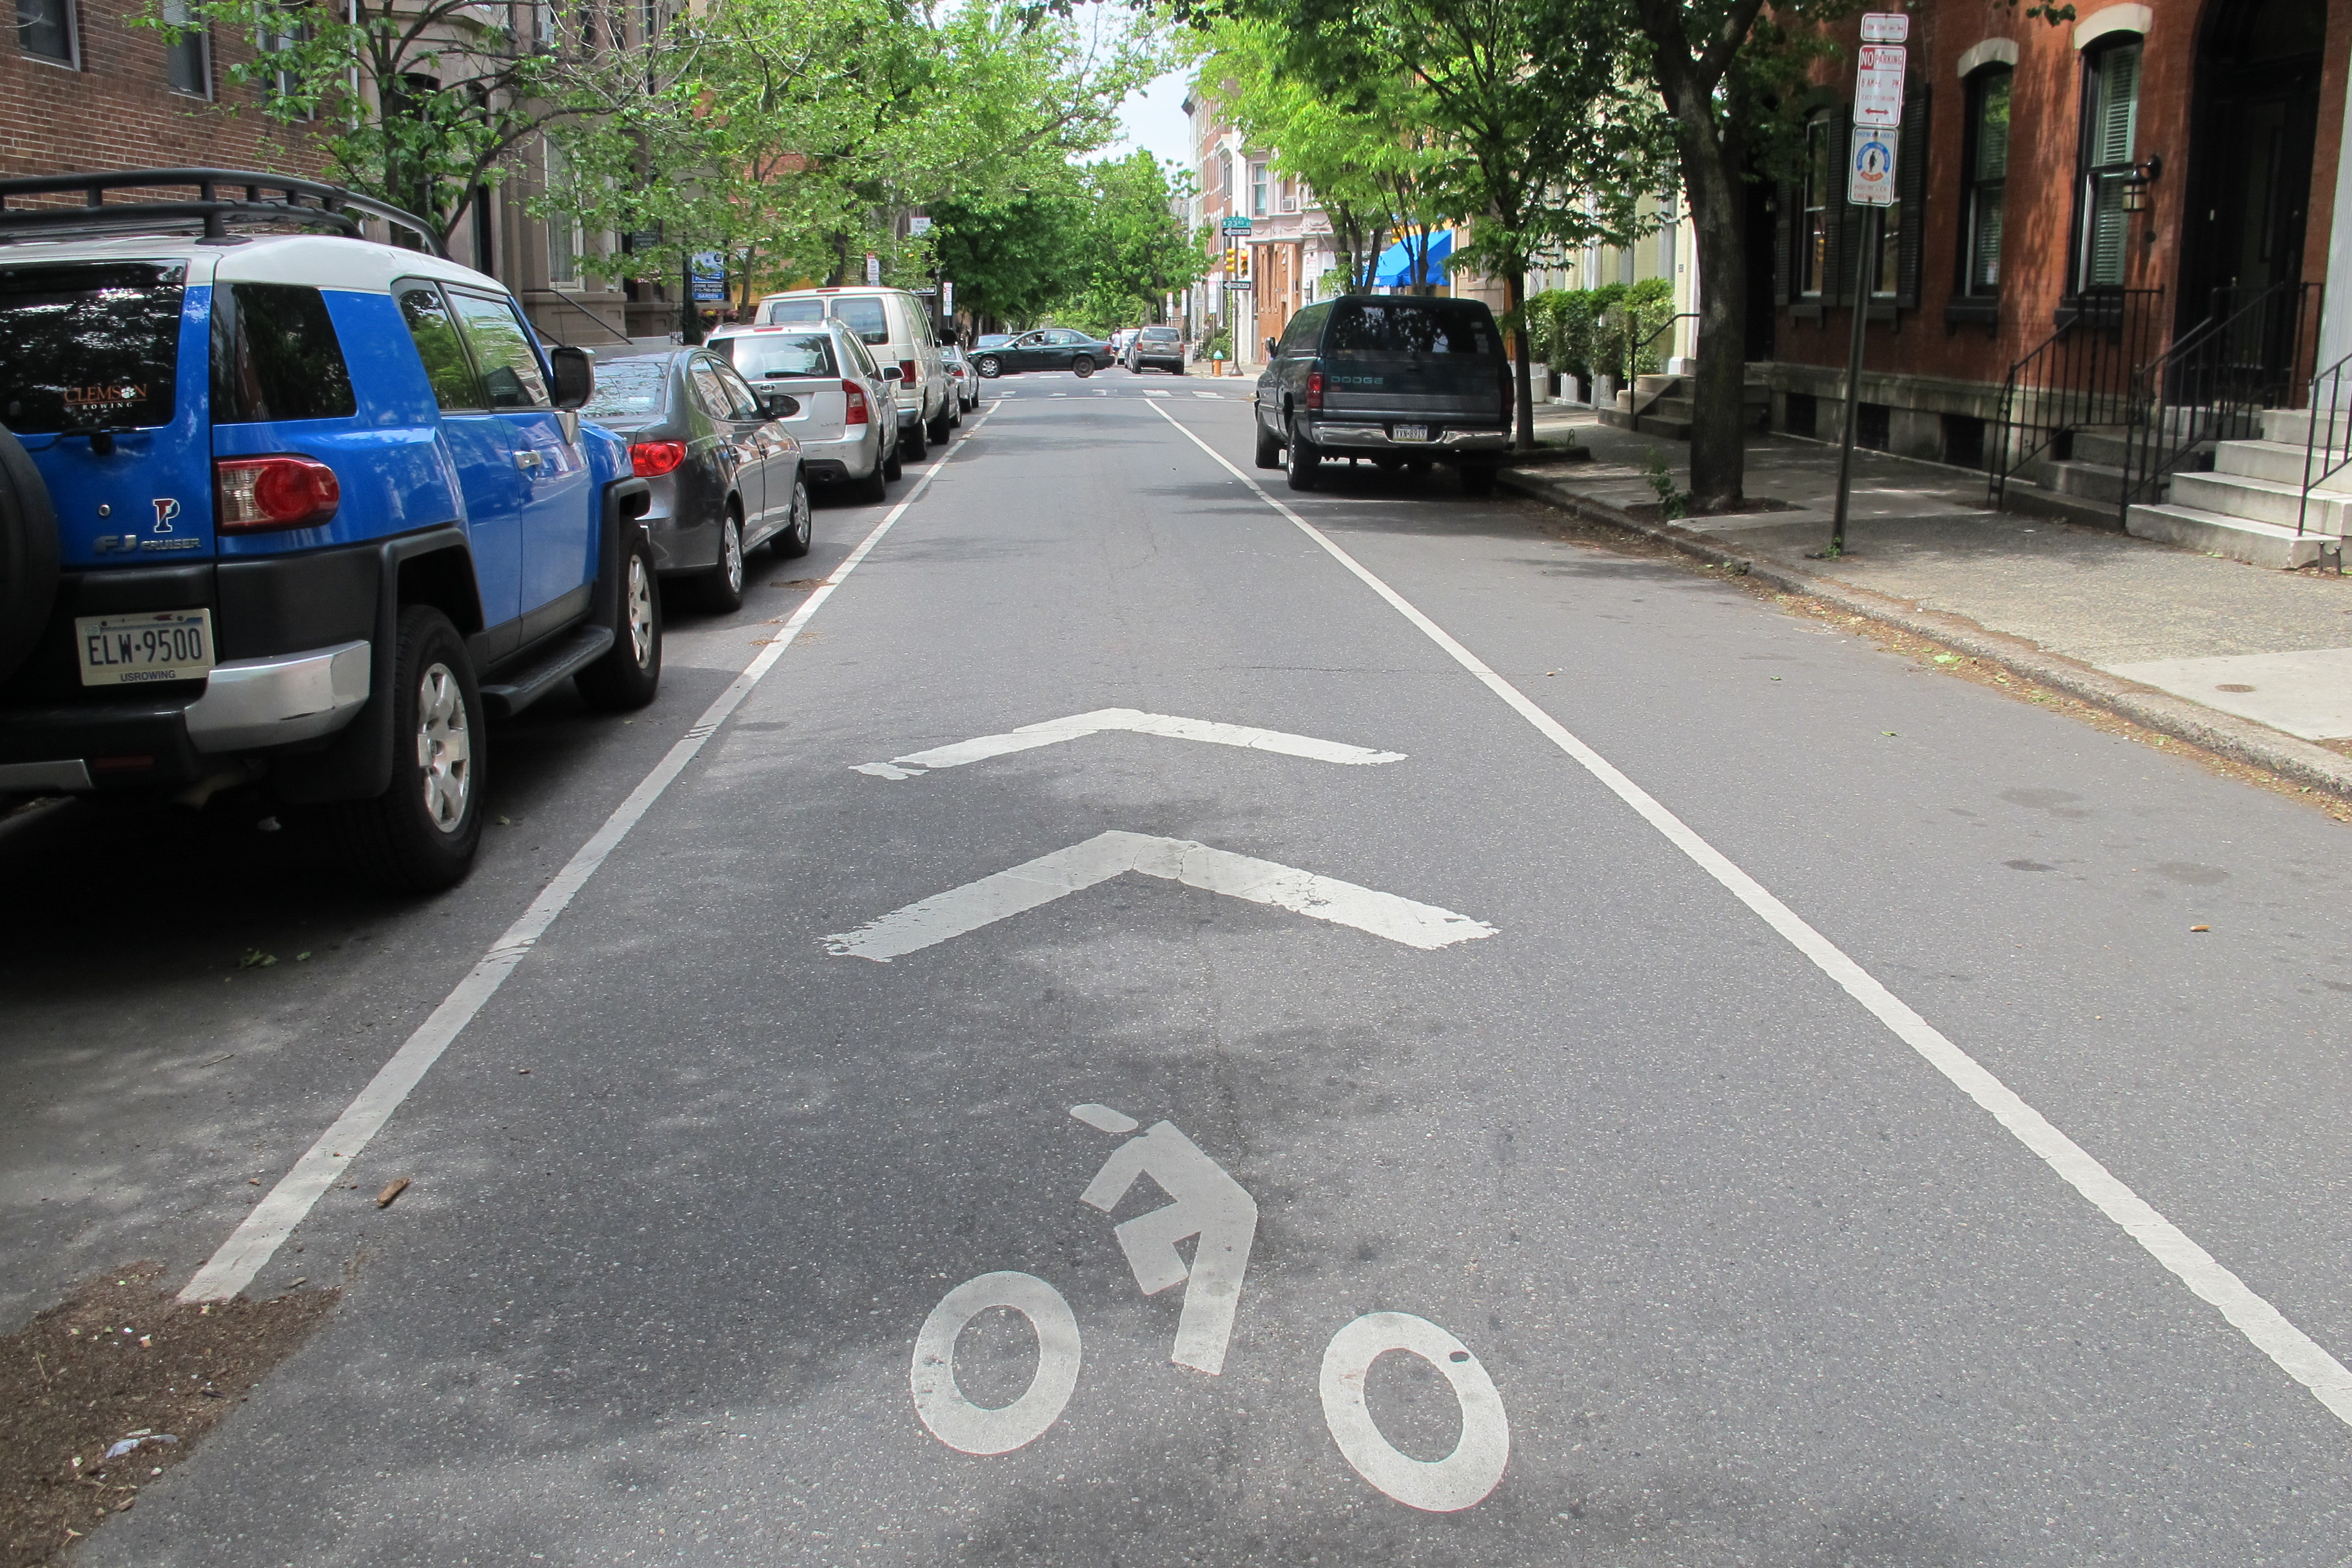 Sharrows , like this one on Spruce Street, are meant to direct bicycle traffic and instruct drivers and cyclists to share the road.